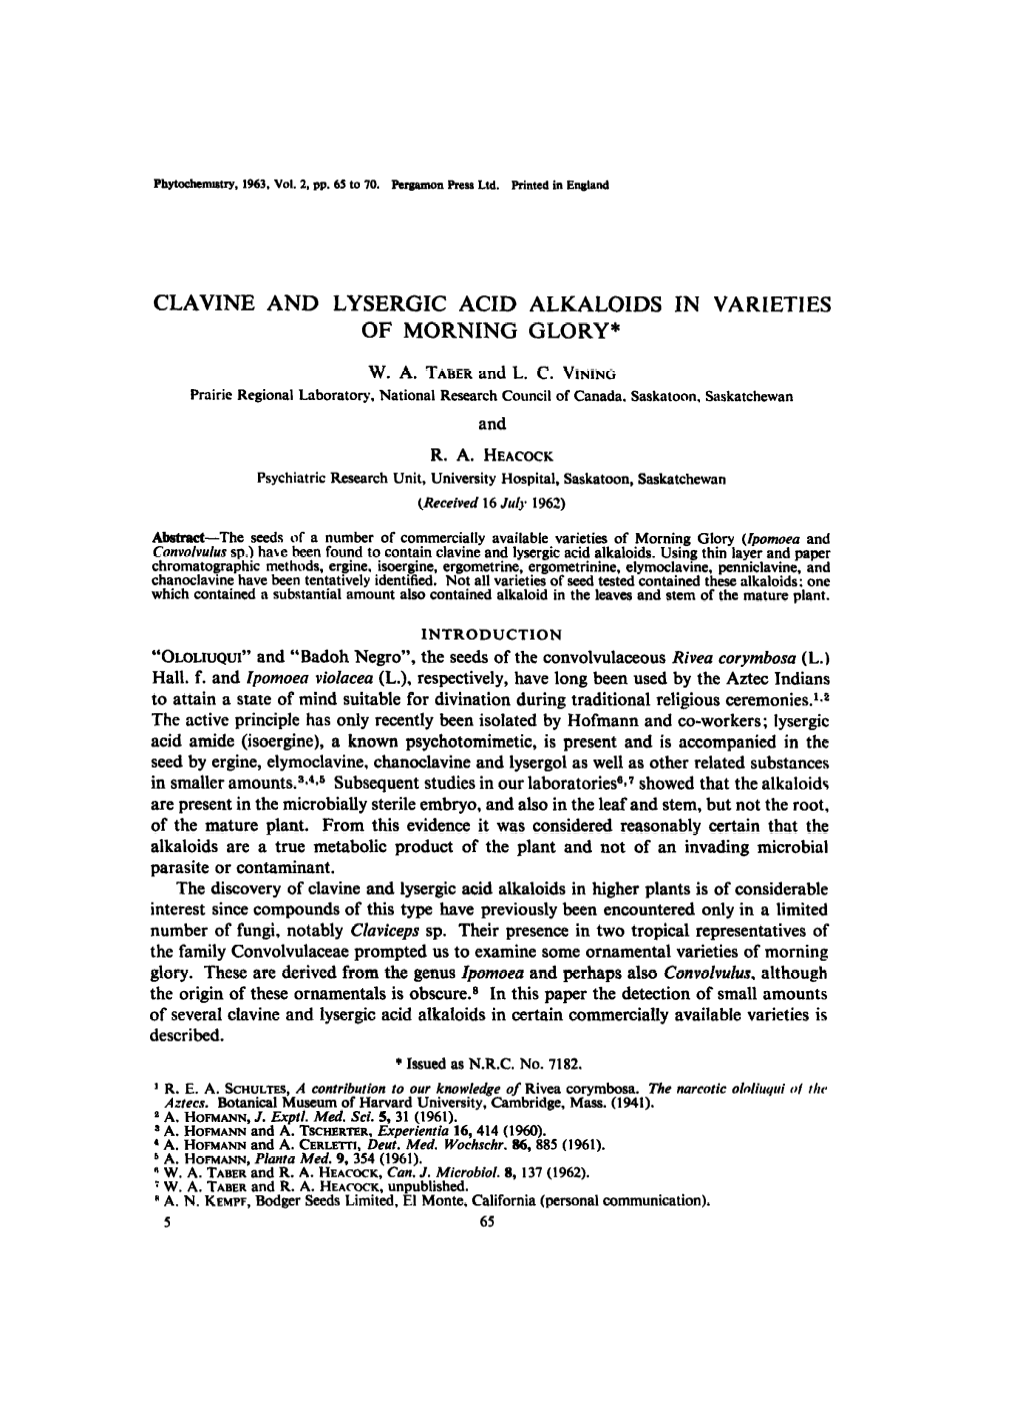 Clavine and Lysergic Acid Alkaloids in Varieties of Morning Glory .Pdf